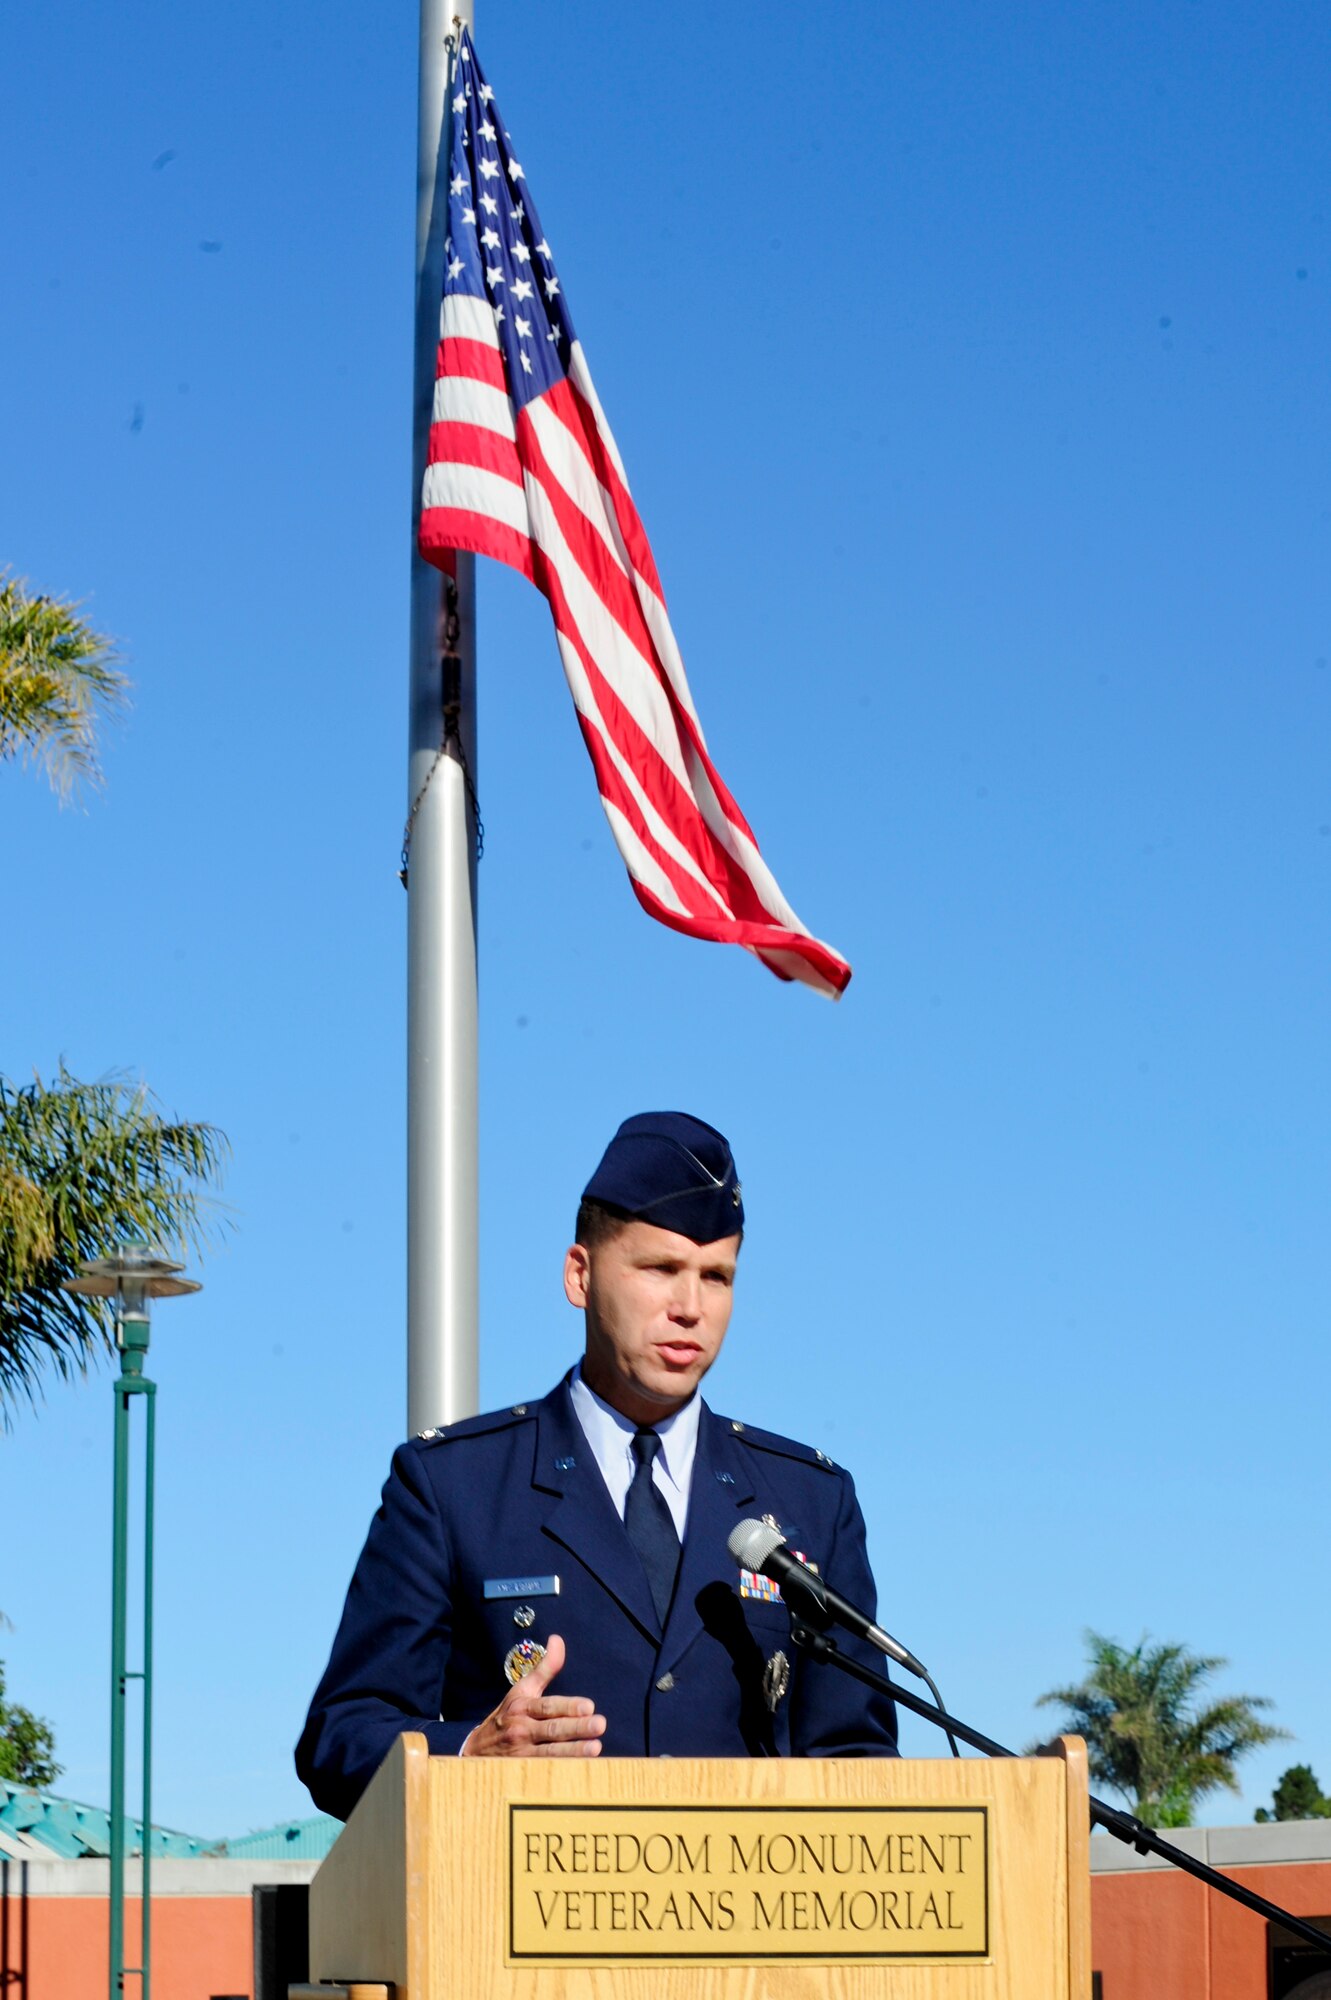 SANTA MARIA, Calif. - Col. Brent McArthur, 30th Space Wing vice commander,
speaks during the Vandenberg Air Force Base Monument Dedication here Friday,
Dec. 7, 2012. The event included keynote speeches from prominent members of
the community, base Honor Guard flag presentation, and the unveiling of the
VAFB Monument. (U.S. Air Force photo/Senior Airman Lael Huss)
